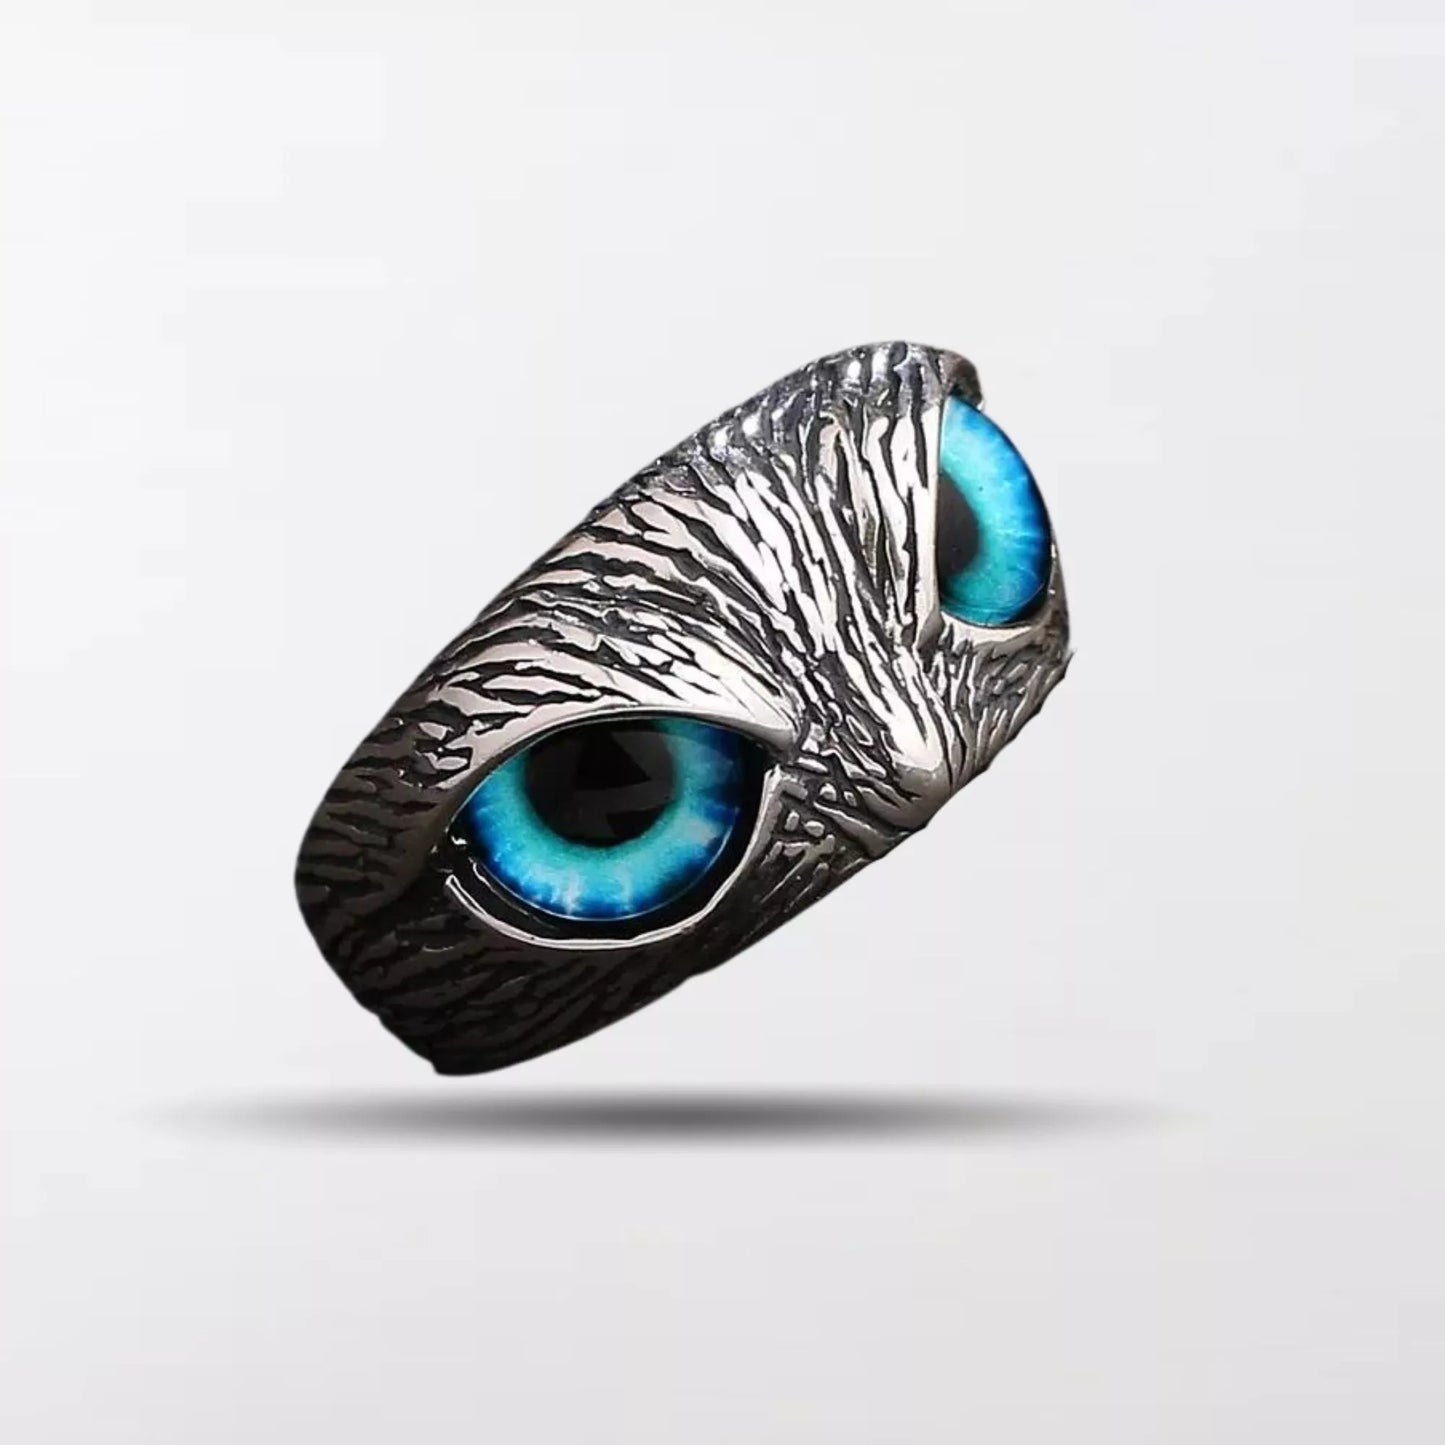 Silver Sterling Owl Ring By Clotechnow Brand